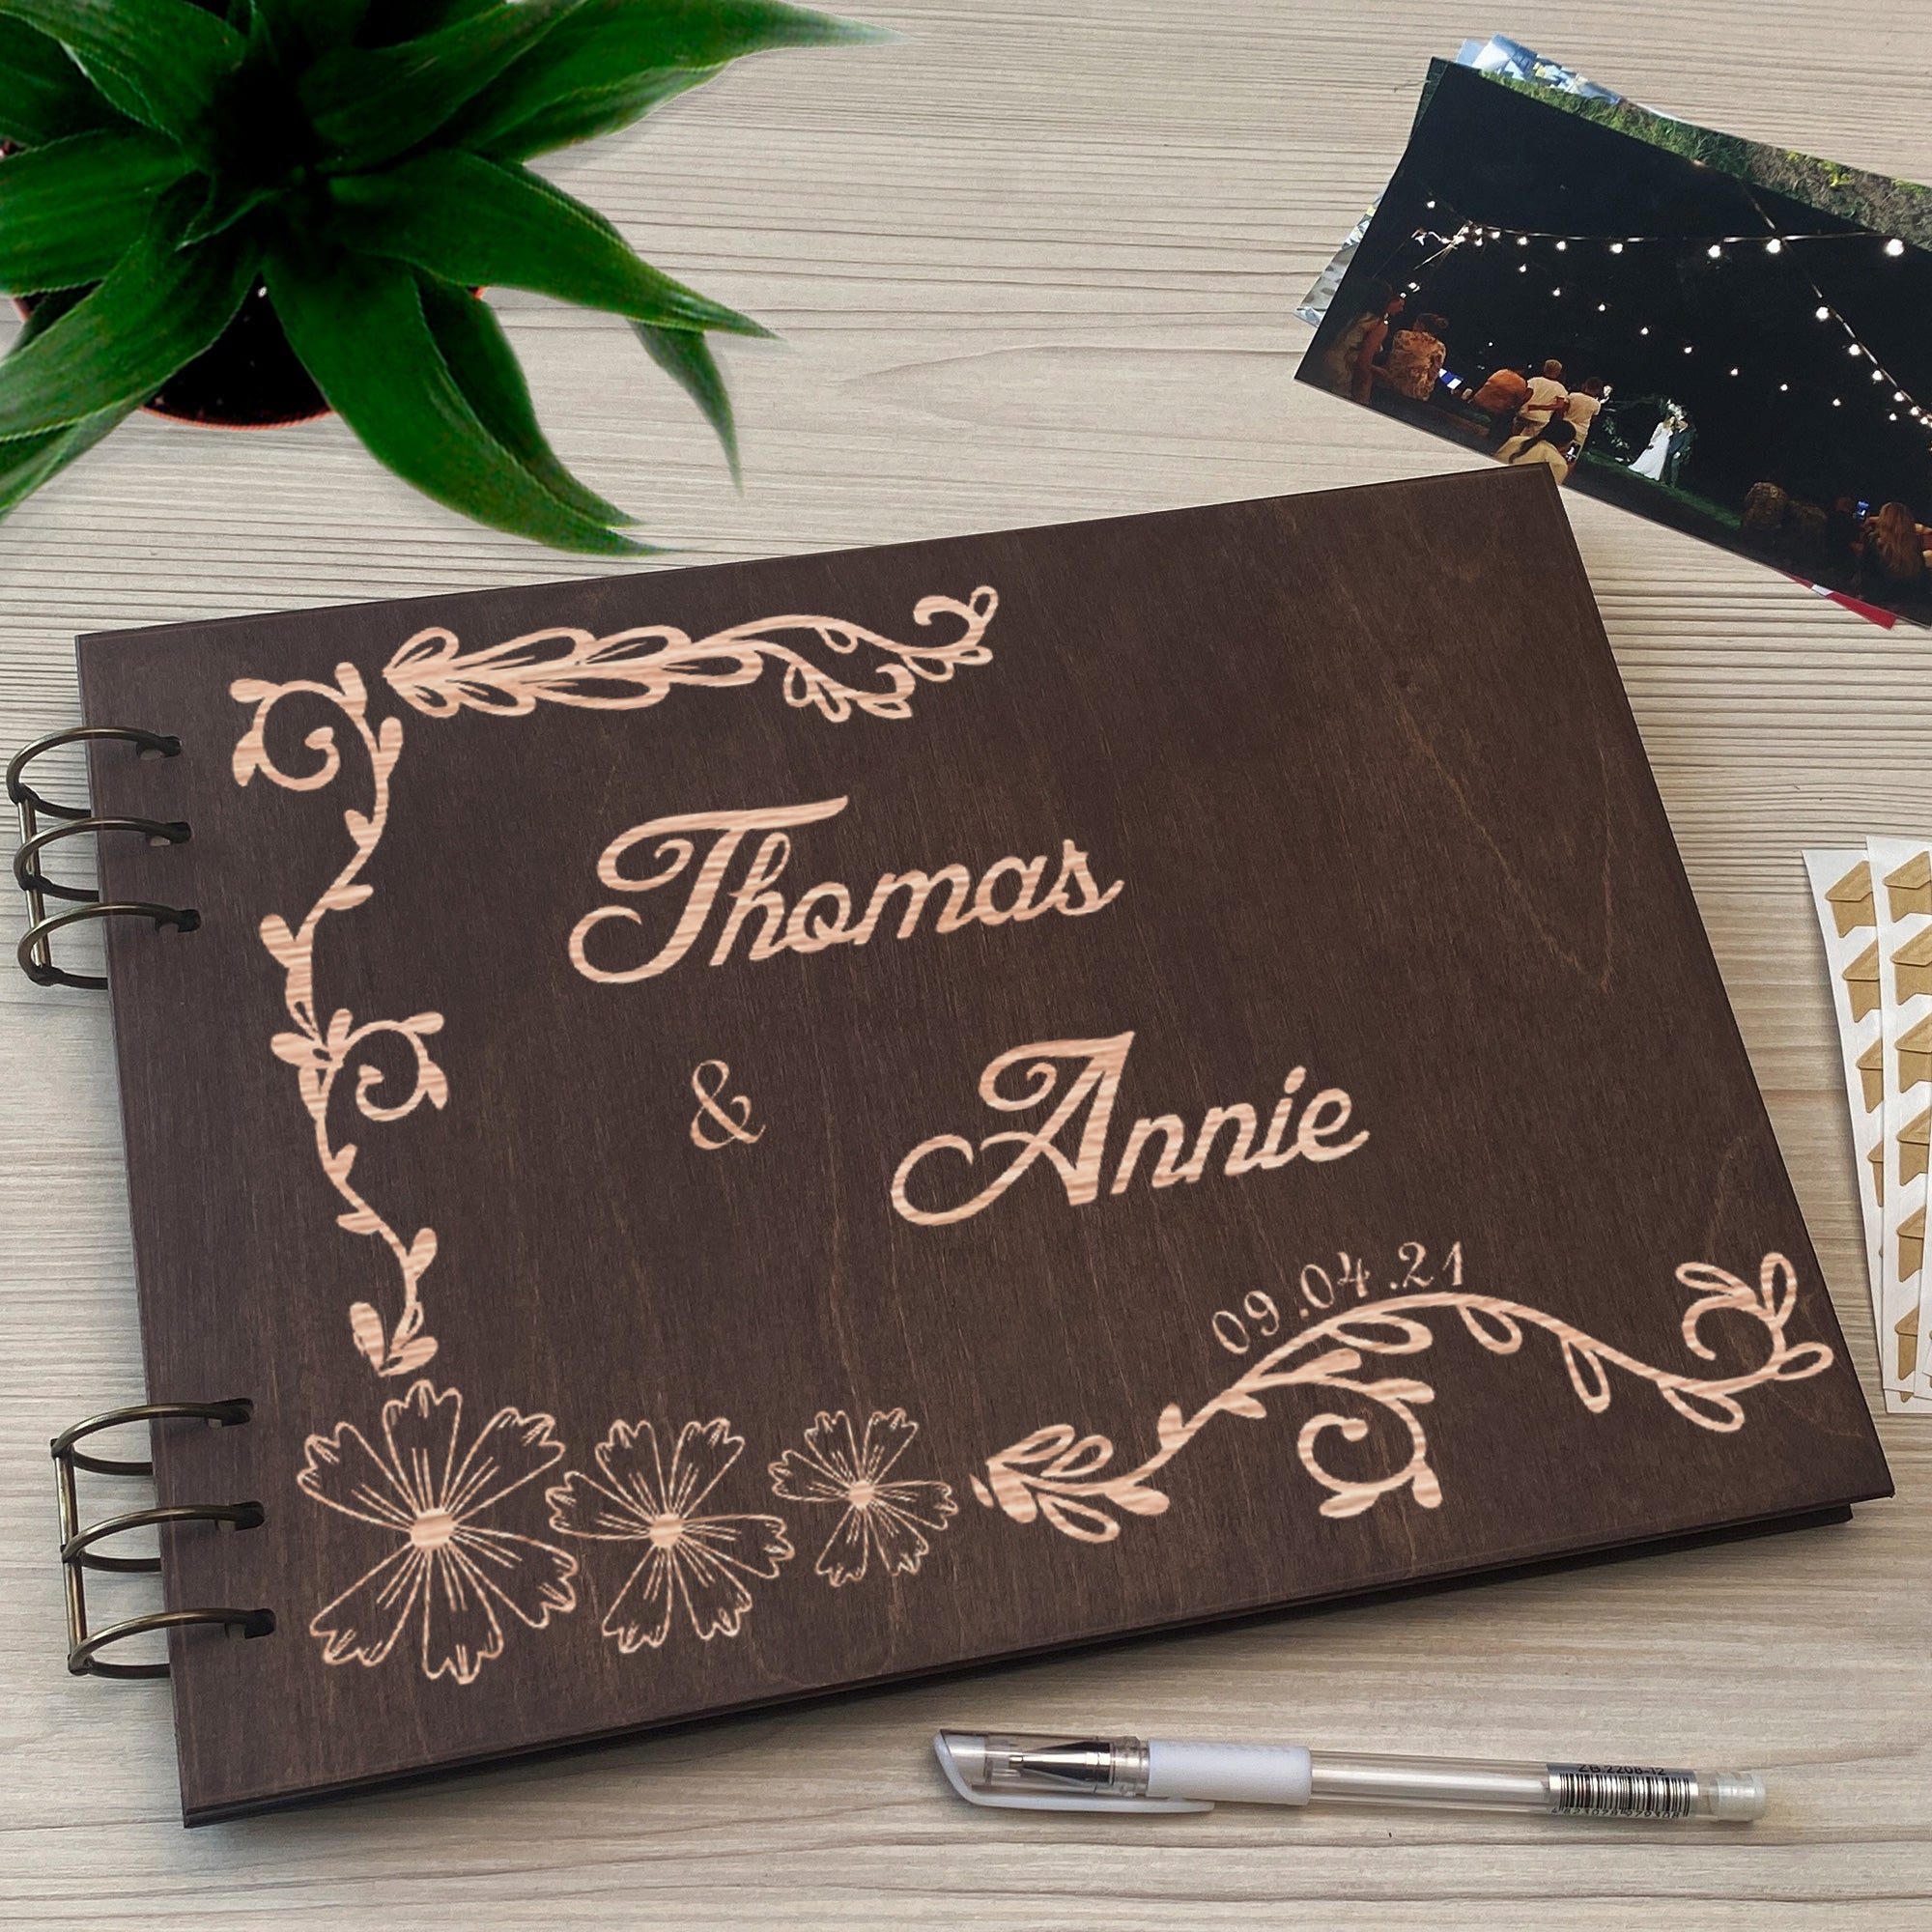 Personalized photo album cover and Family engraving